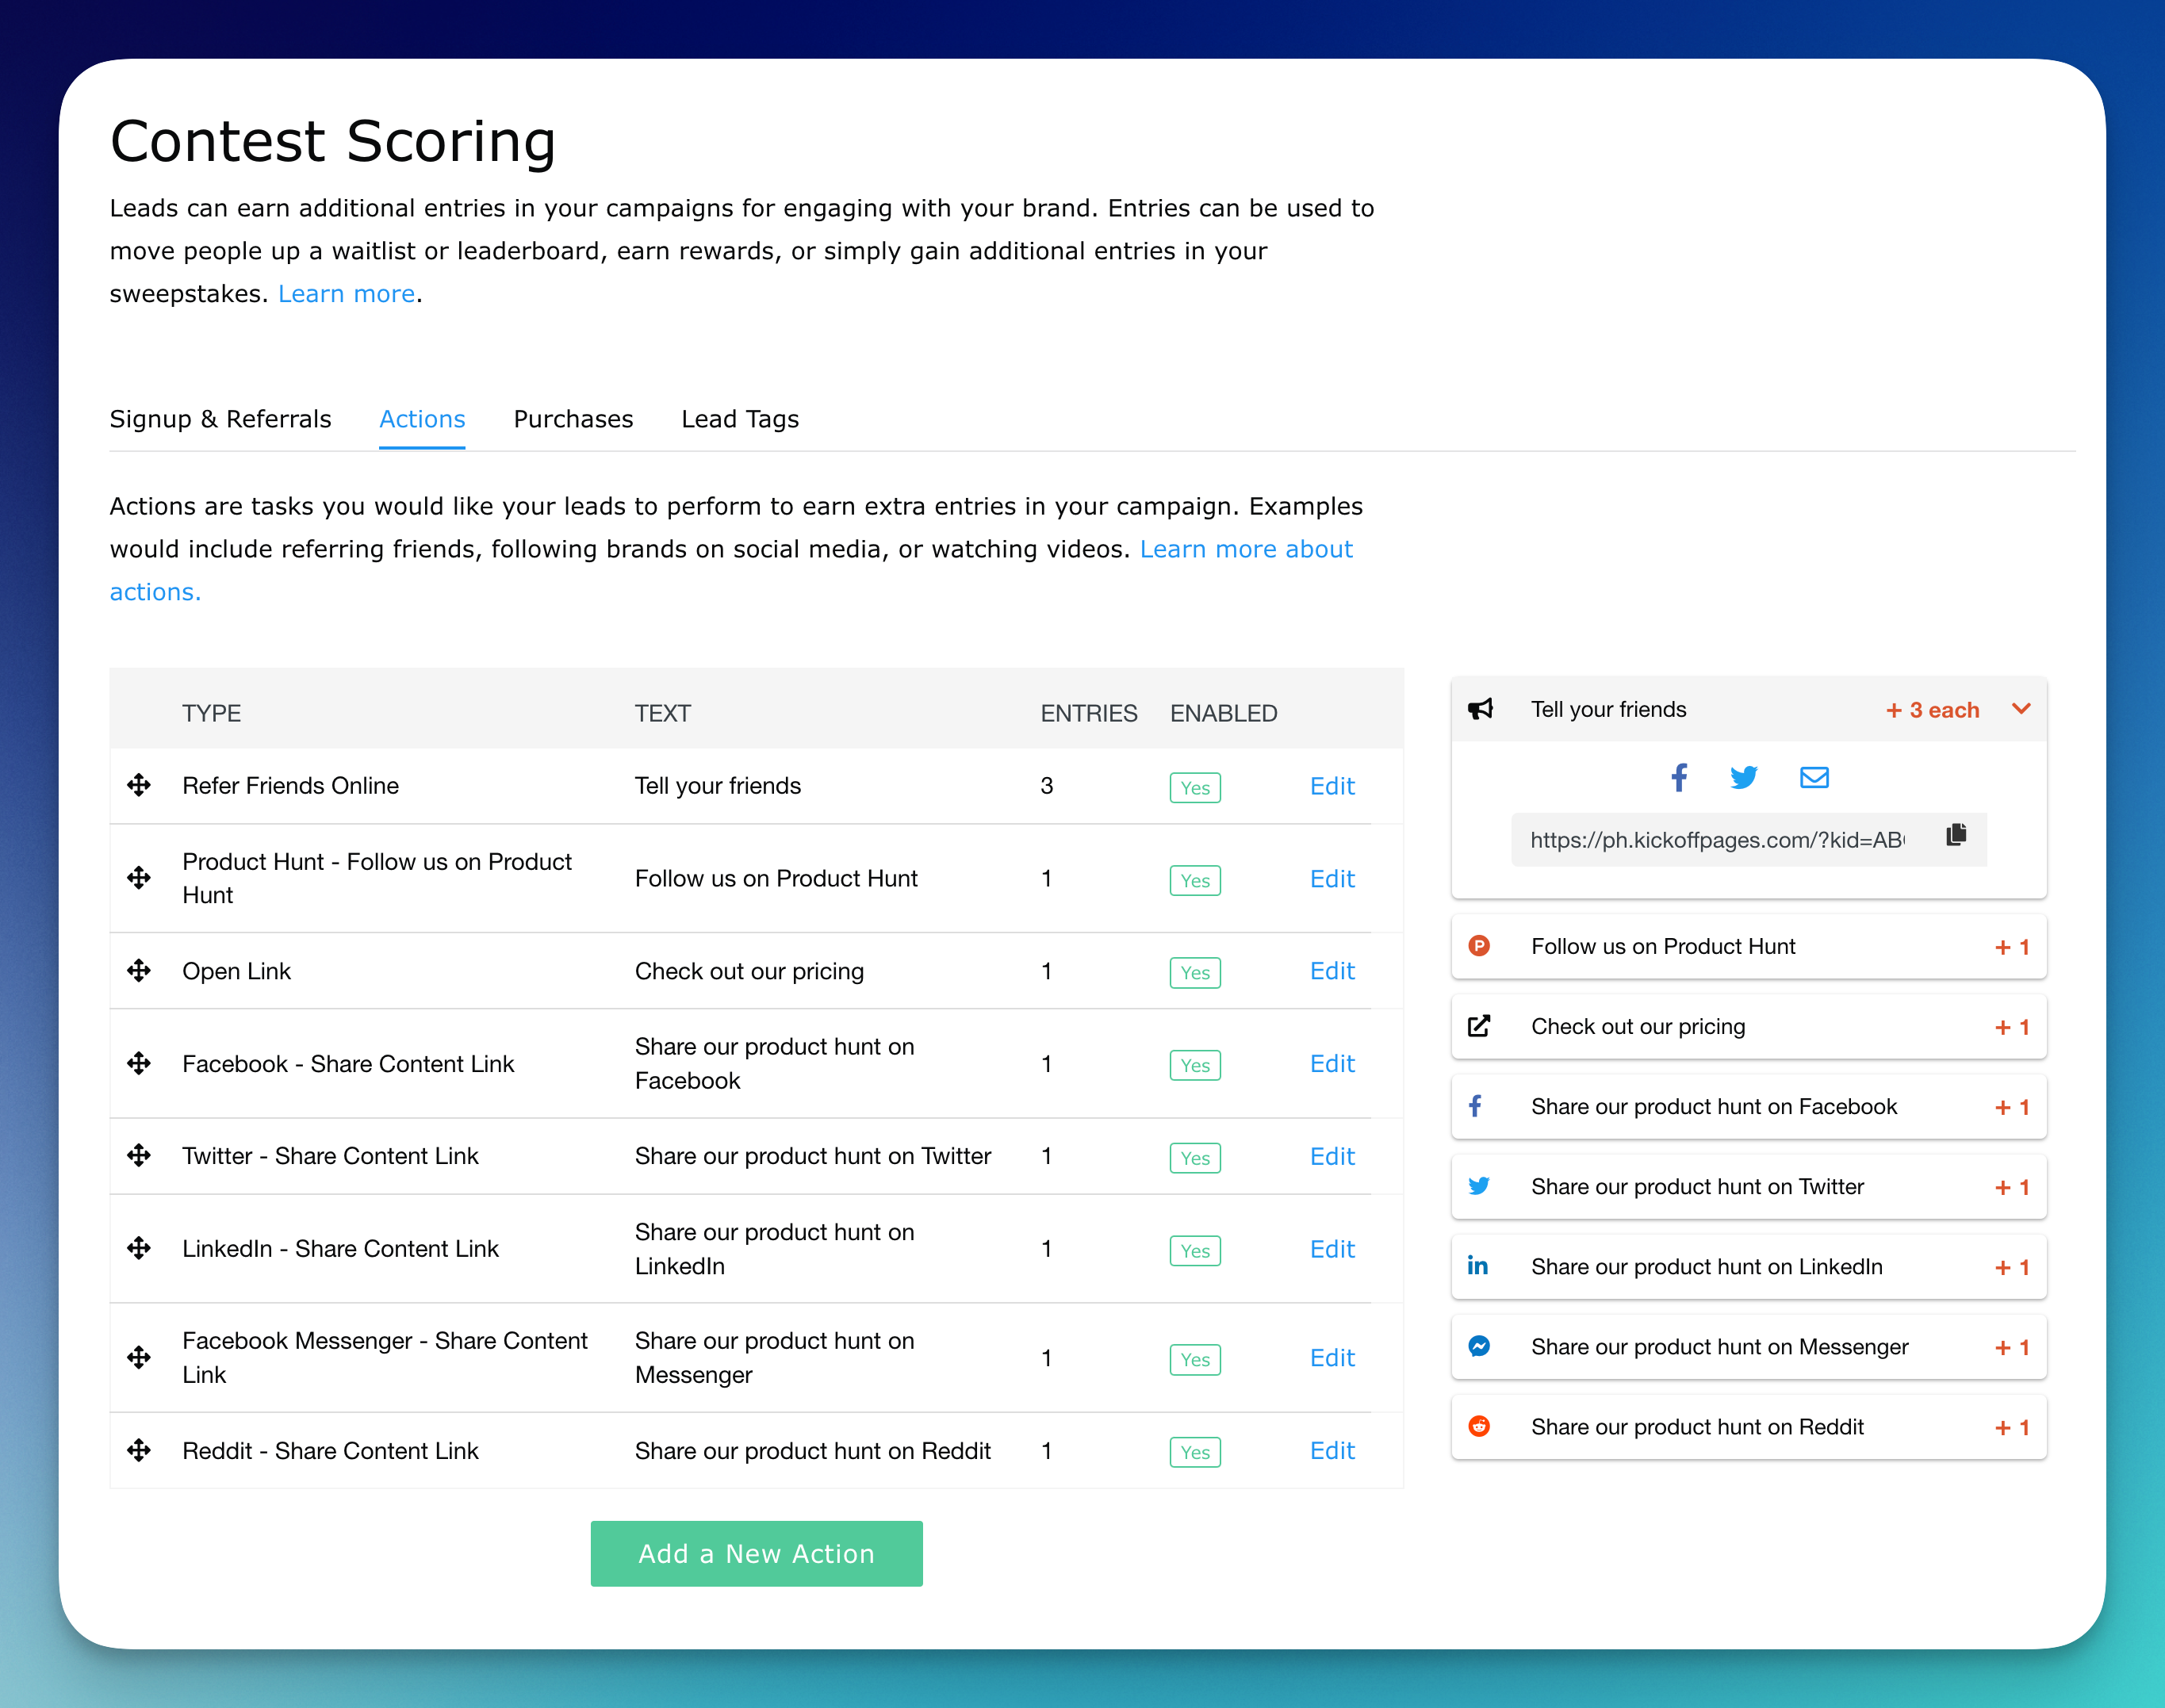 Customizable lead scoring based on referrals and custom social actions.